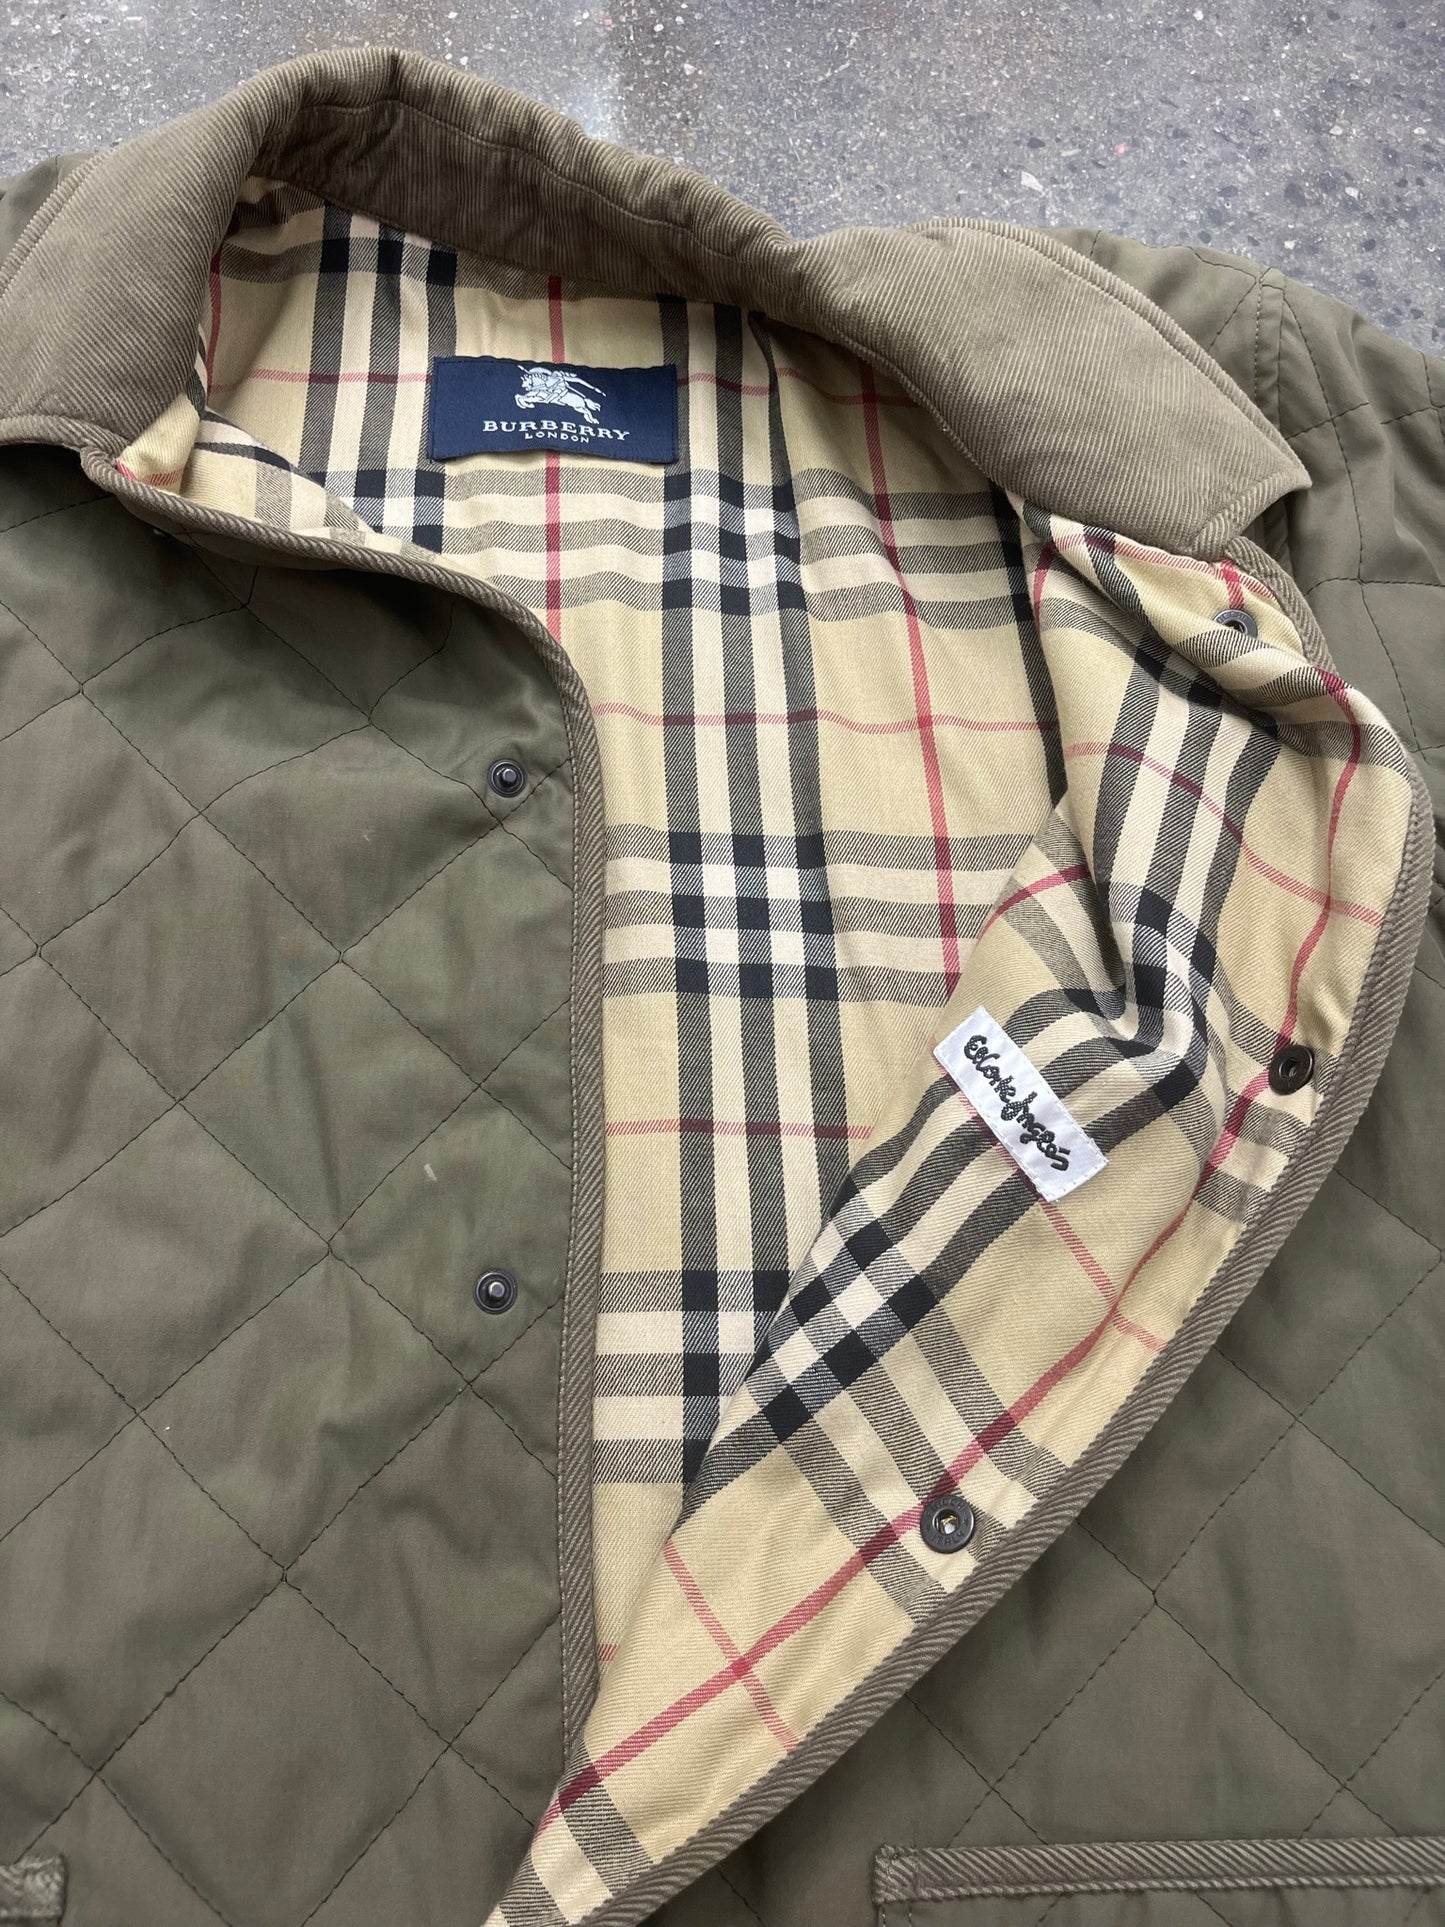 Vintage Burberry Quilted Light Jacket Size M